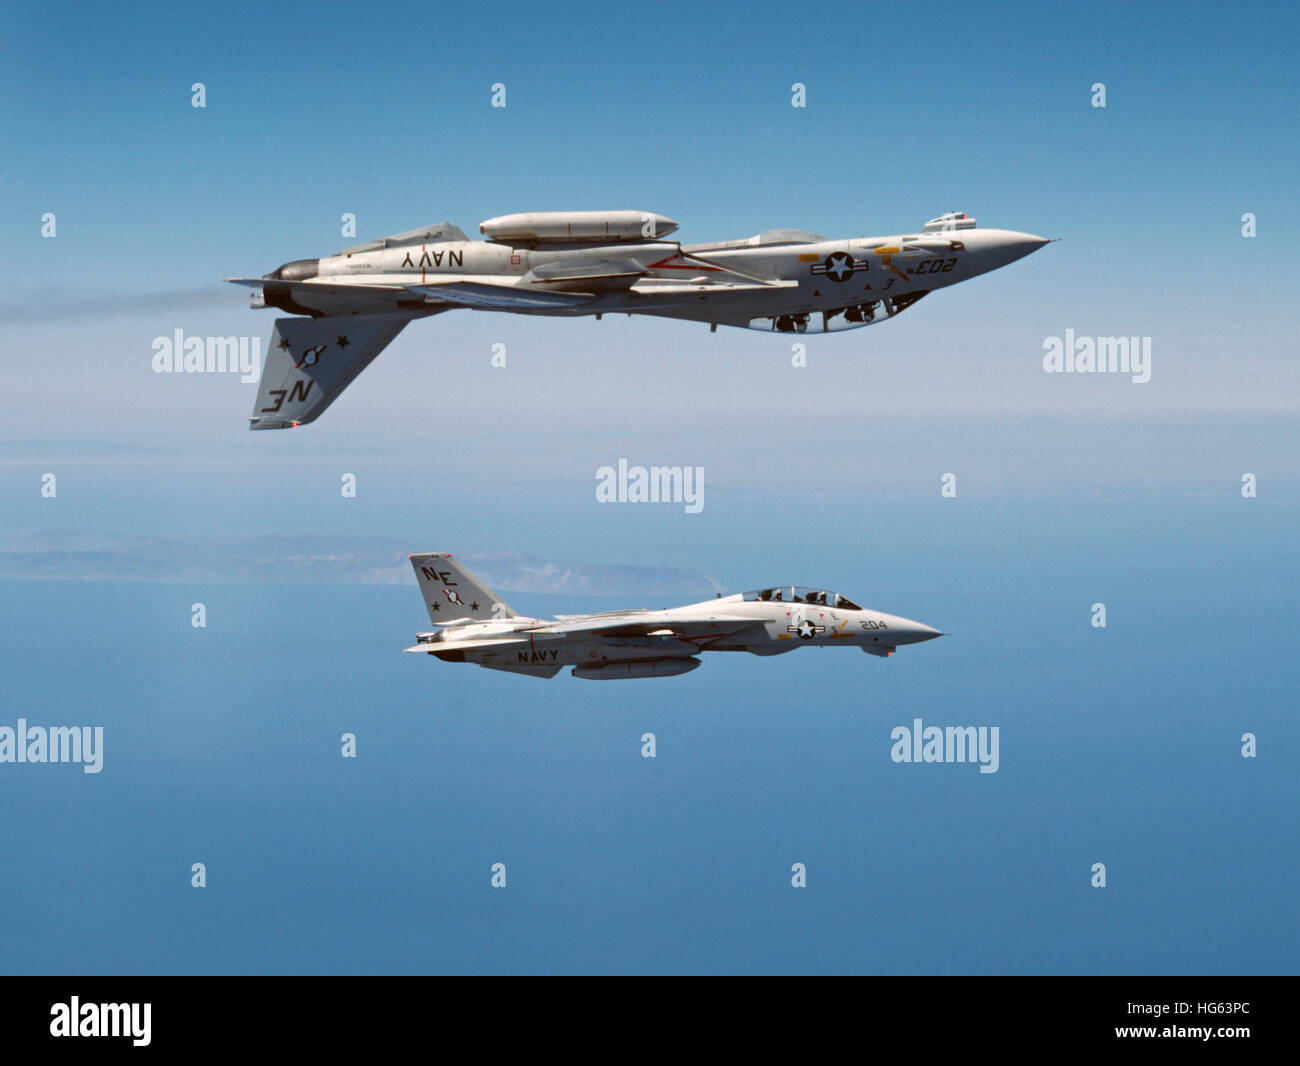 Two F-14A Tomcats perform aerobatics above the Pacific Ocean. Stock Photo